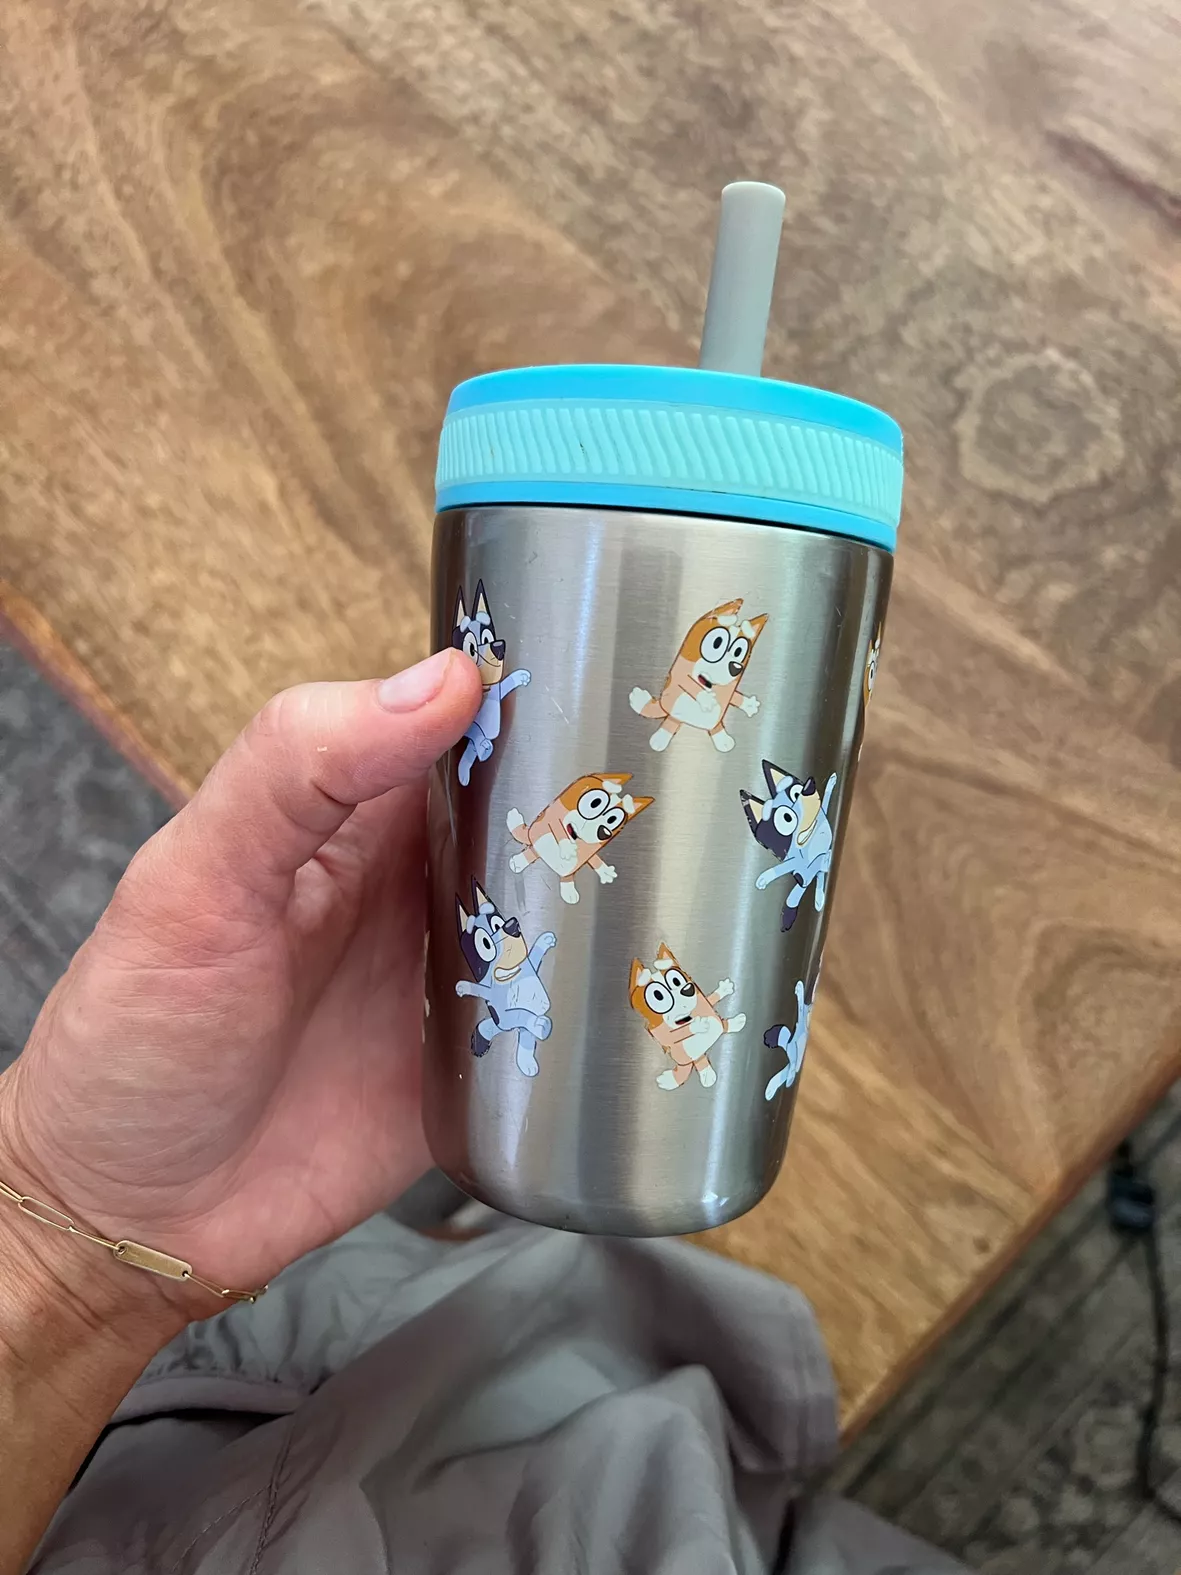 Zak Designs With Presentation Box Sippy Cups